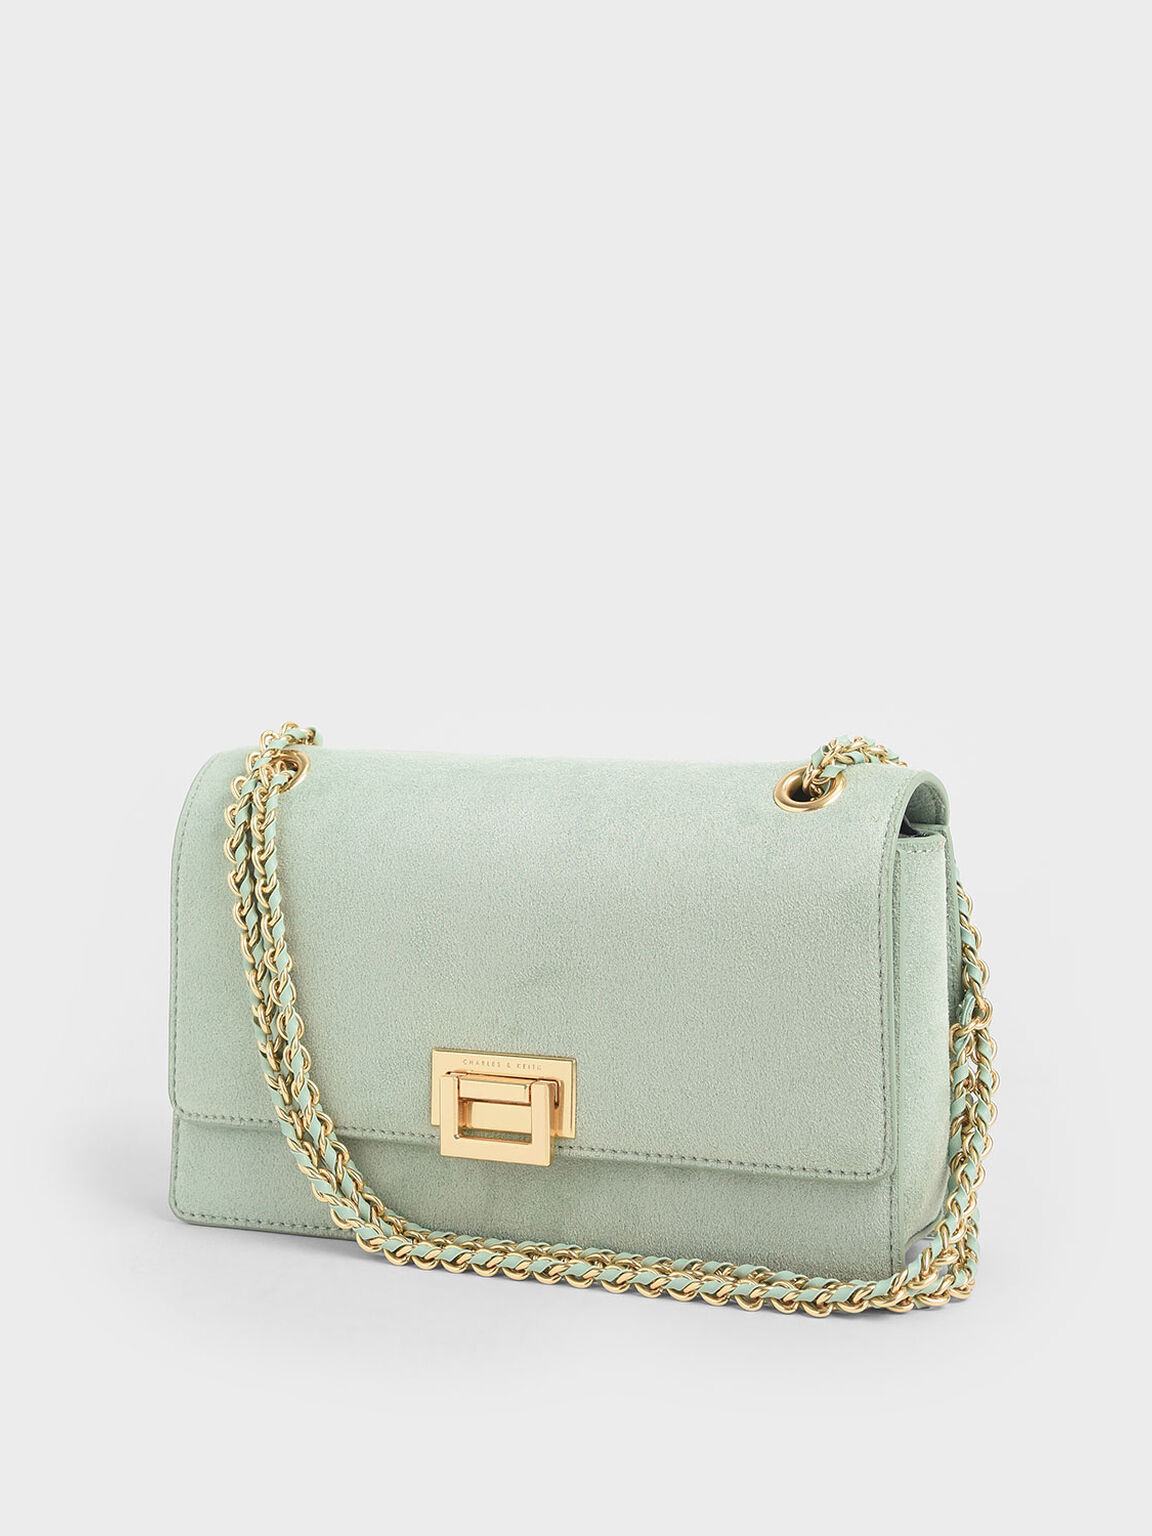 Mint Green Textured Chain Handle Bag - CHARLES & KEITH ID